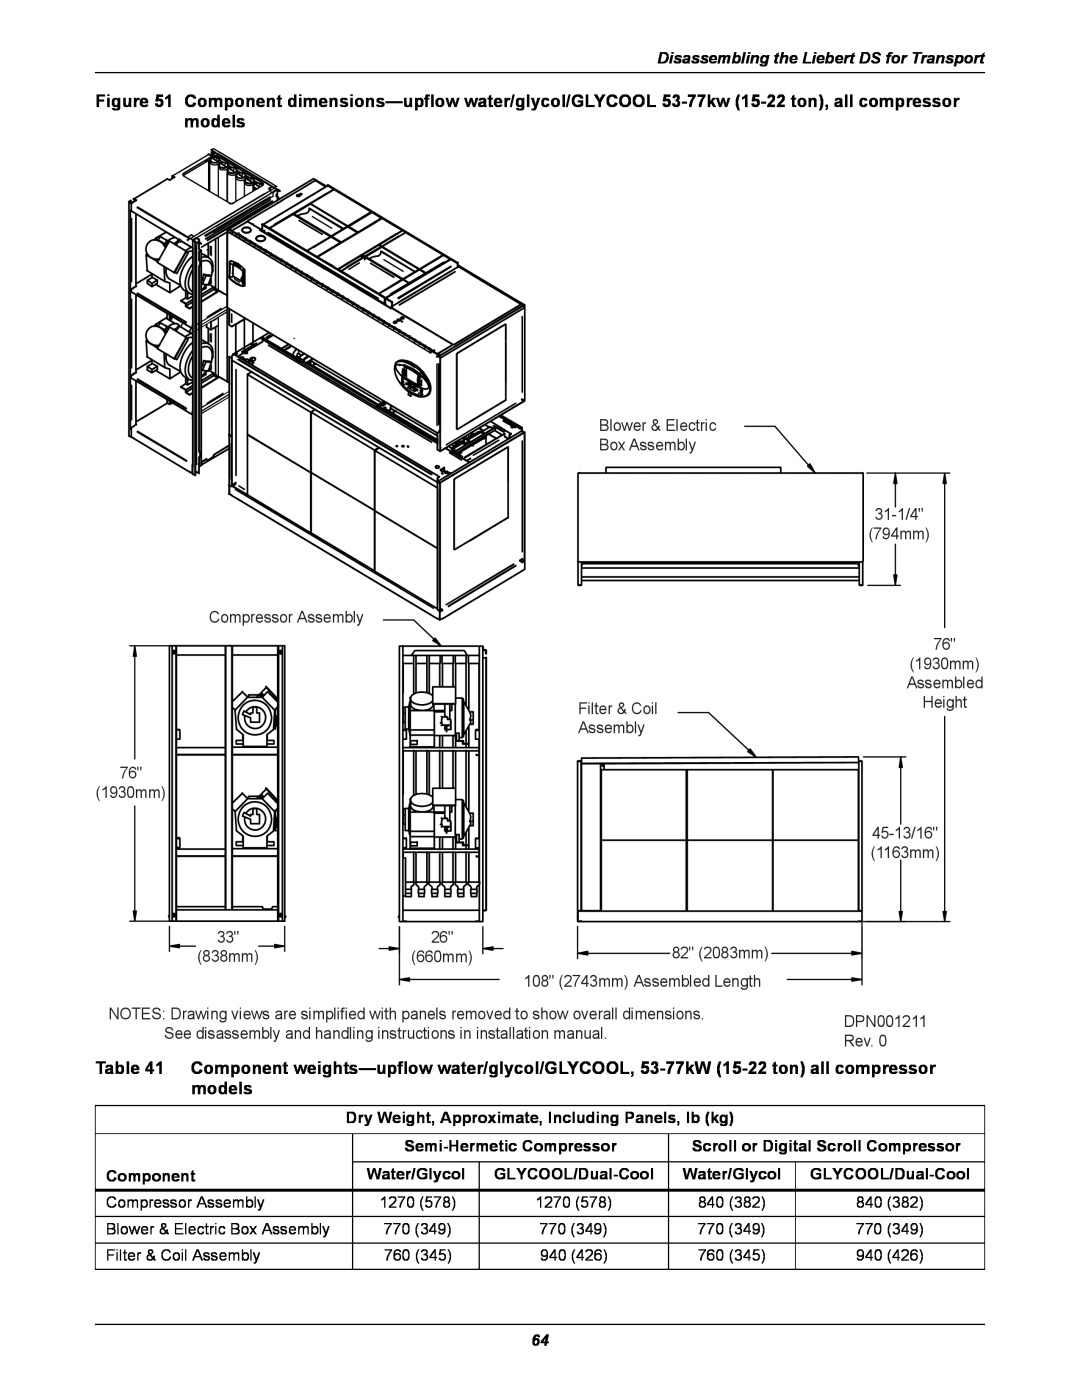 Liebert DS user manual Component dimensions-upflow water/glycol/GLYCOOL 53-77kw 15-22 ton, all compressor models 